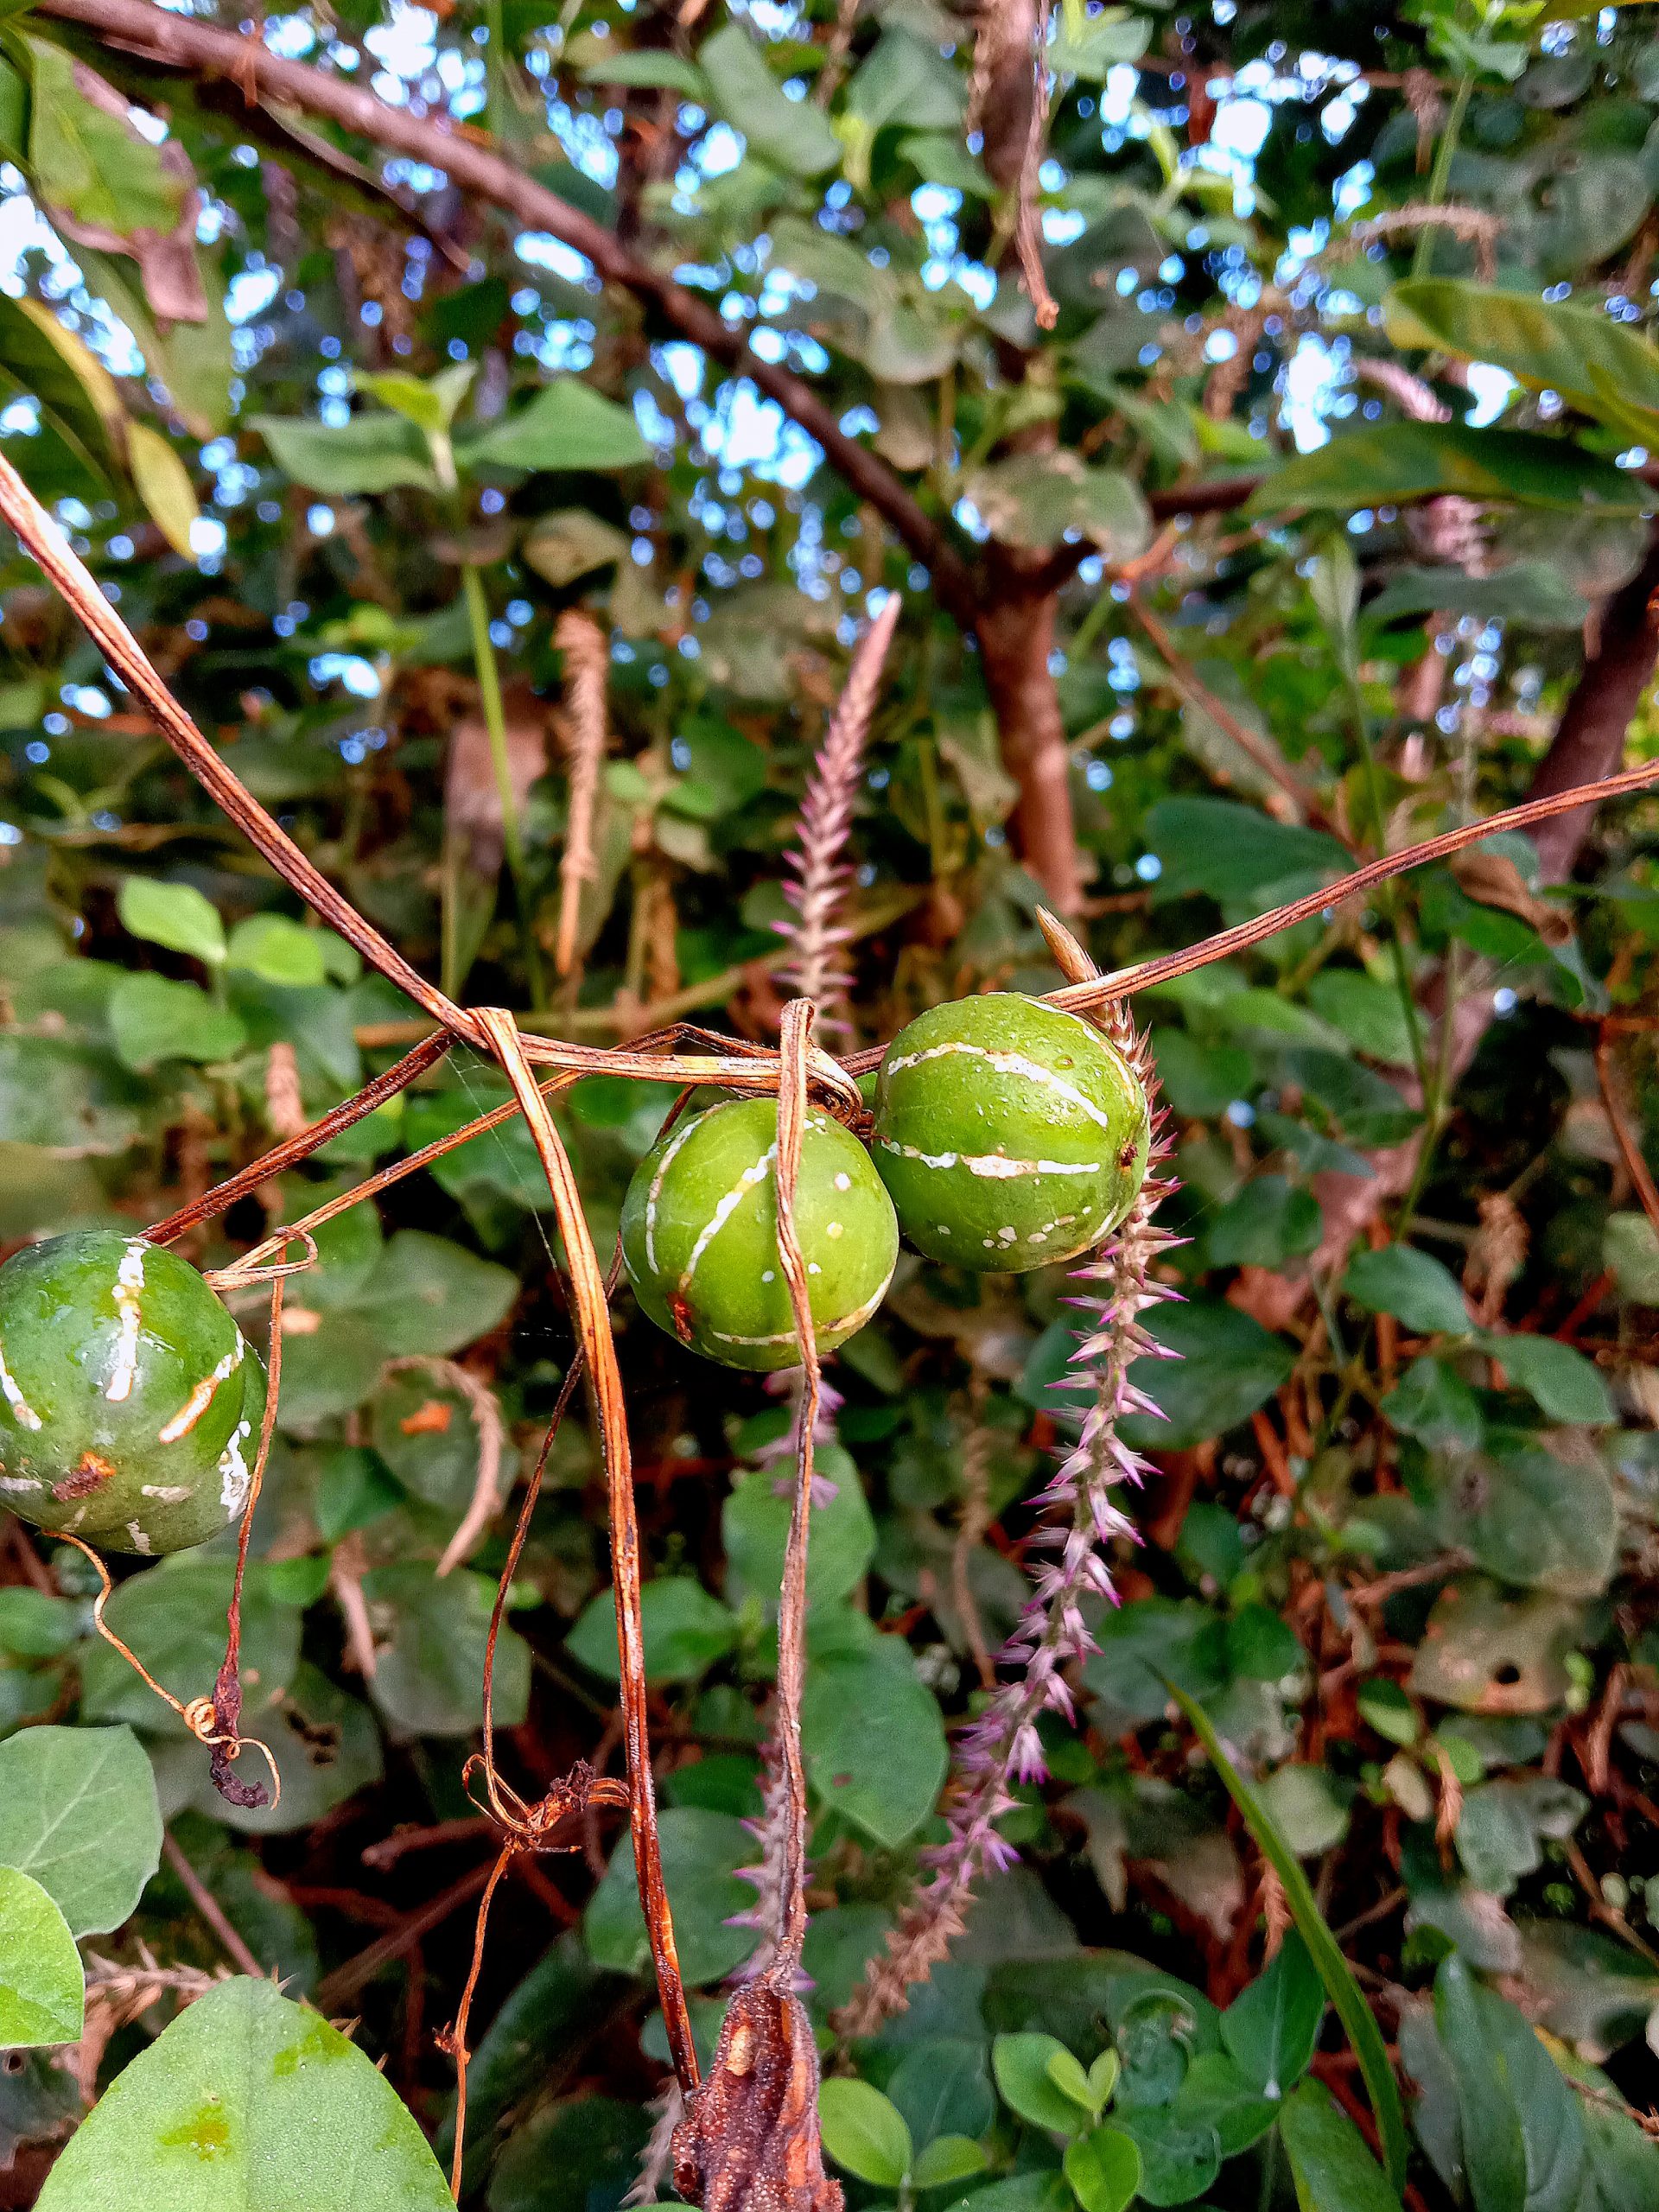 Green fruit hanging on the plant